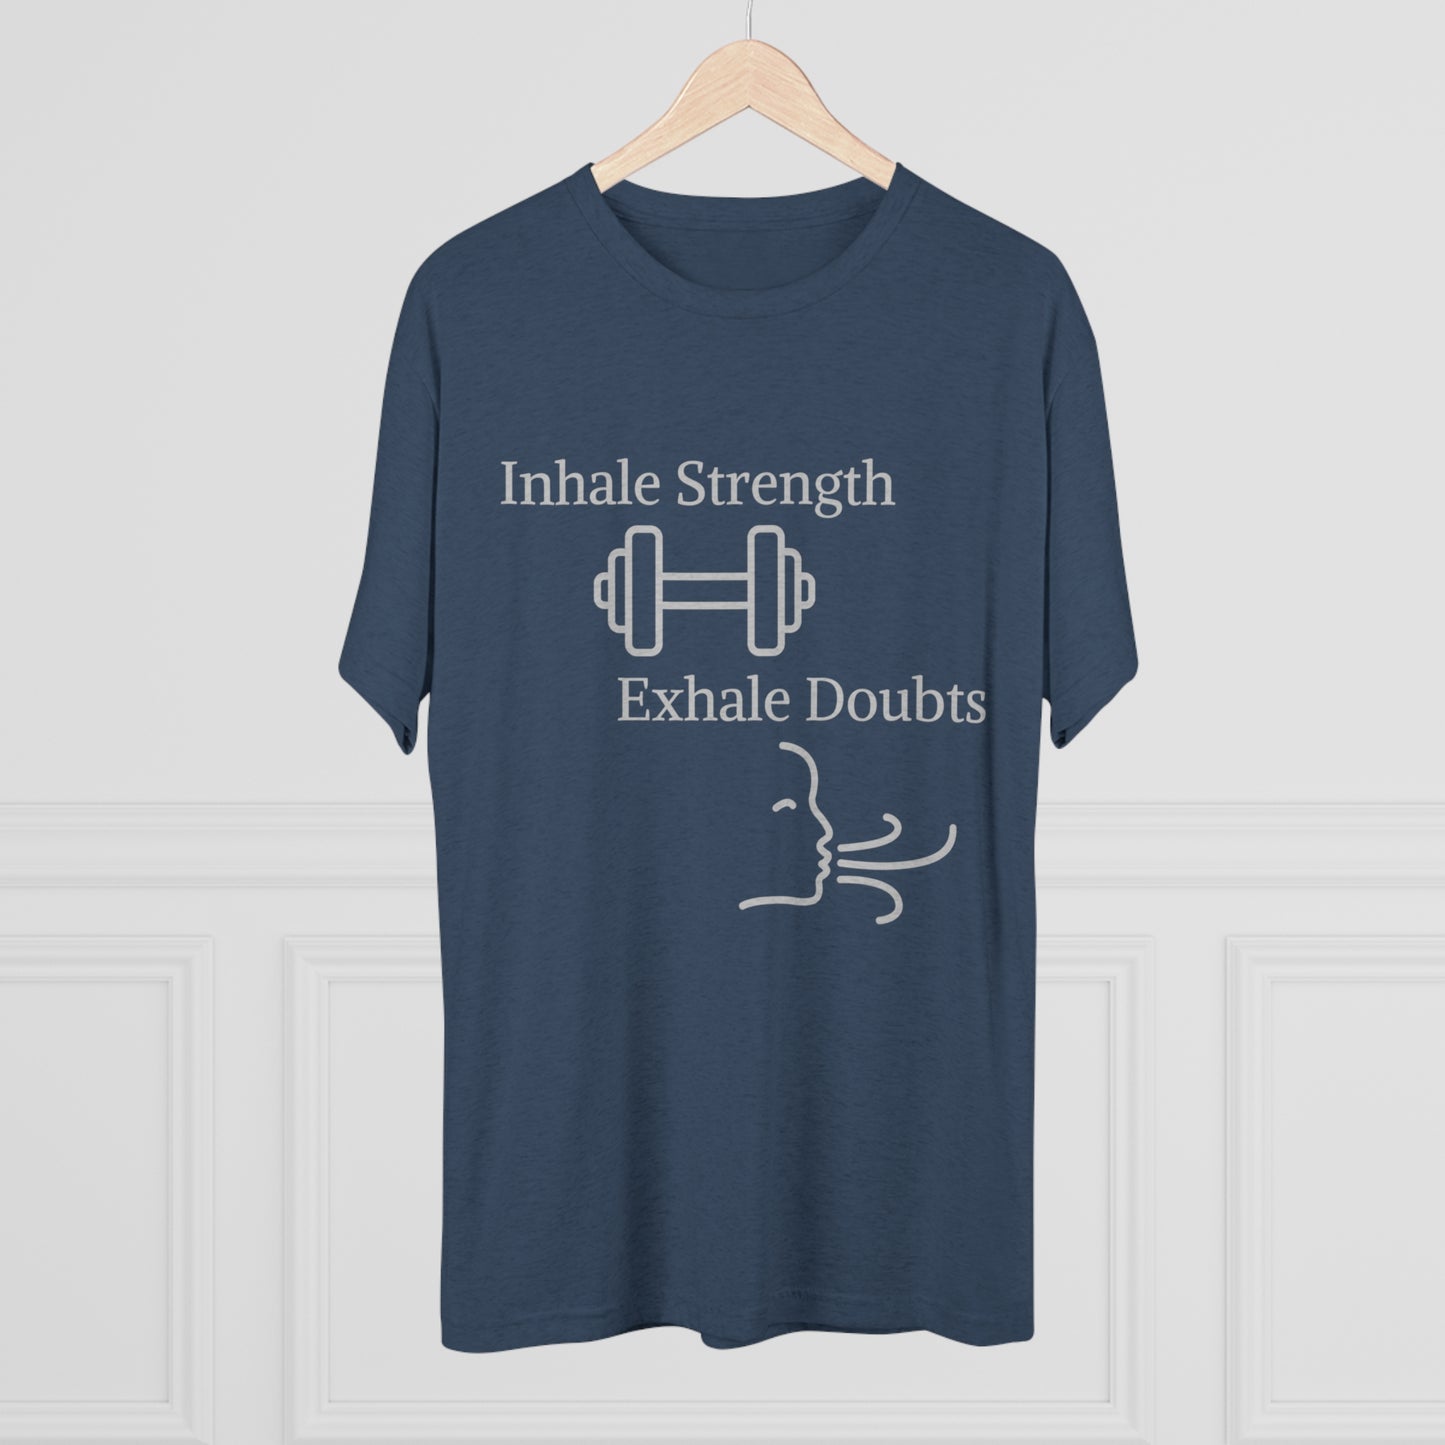 A navy blue motivational Inhale Strength Exhale Doubt w Images - Unisex Tri-Blend Crew Tee by Printify on a hanger featuring the text "inhale strength, exhale doubts" with graphics of a dumbbell and swirling lines symbolizing breath.